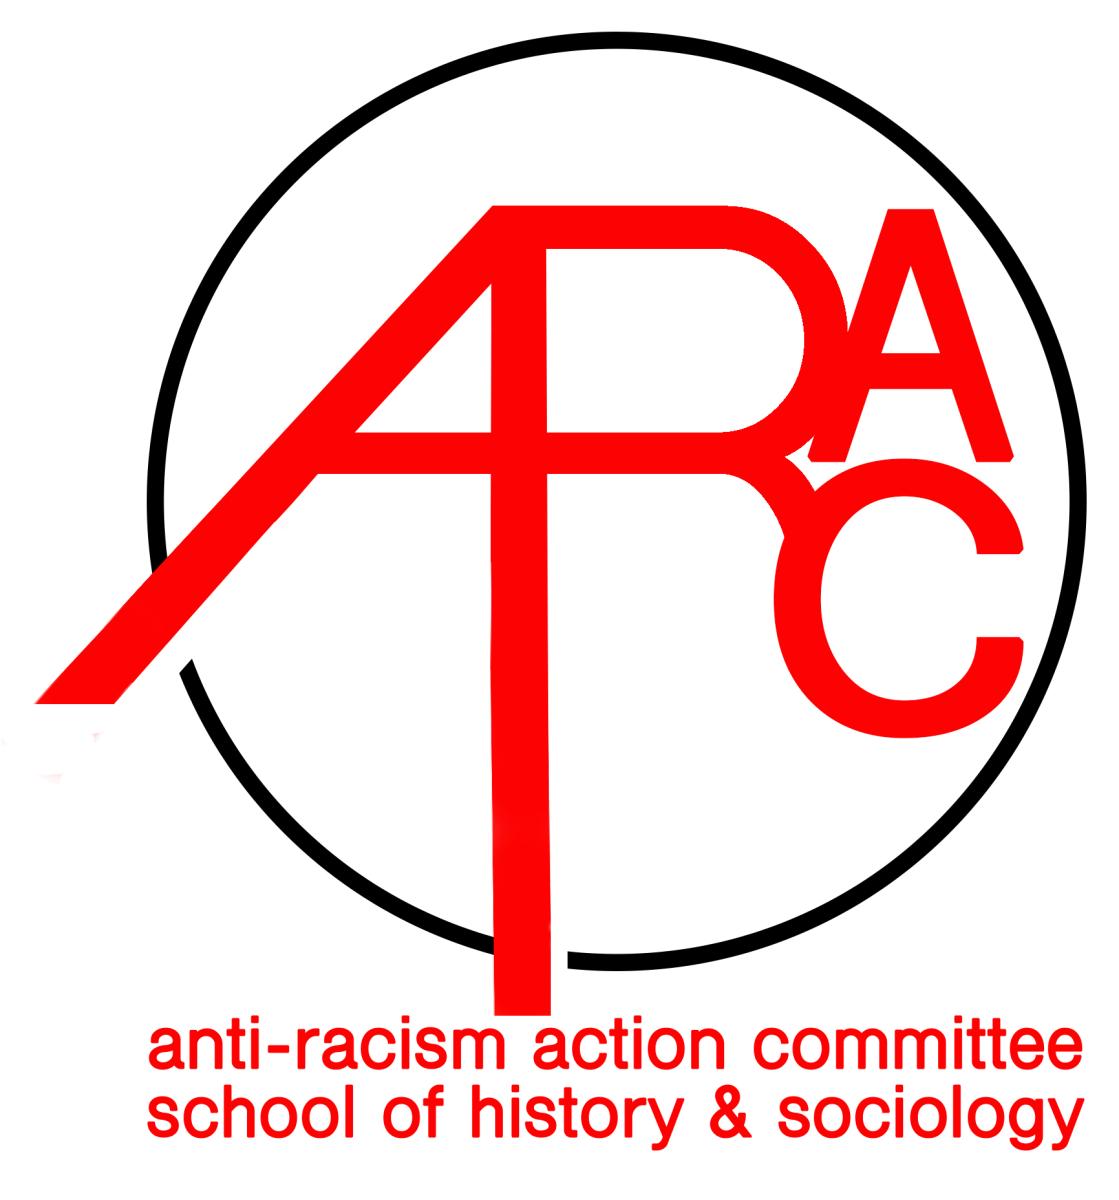 ARAC logo in red on a white background with text reading "anti-racism action committee school of history and sociology"